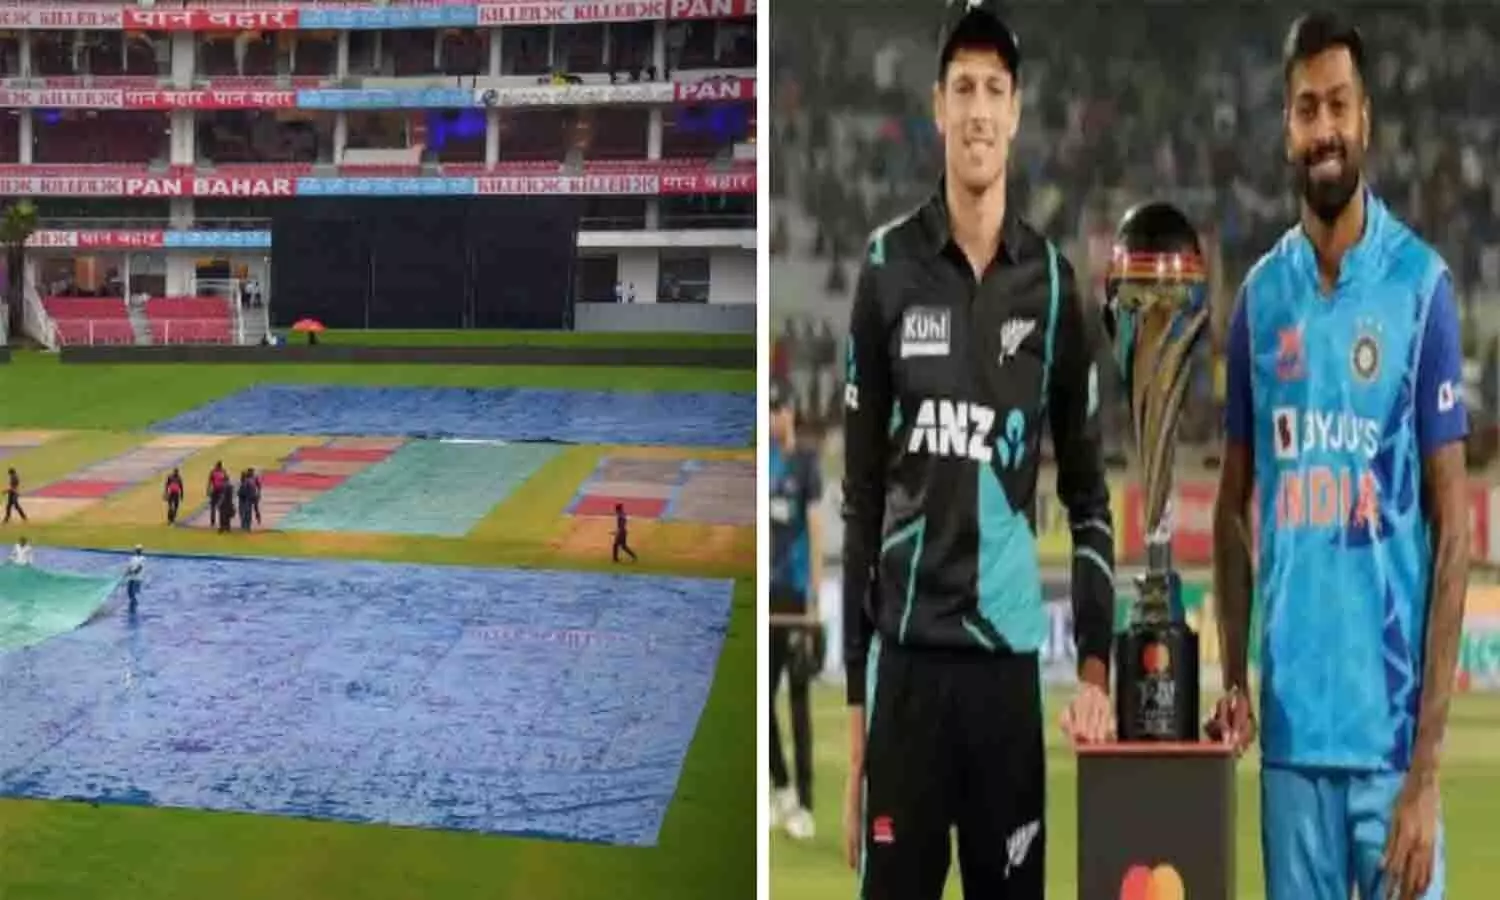 IND vs NZ 2nd T20